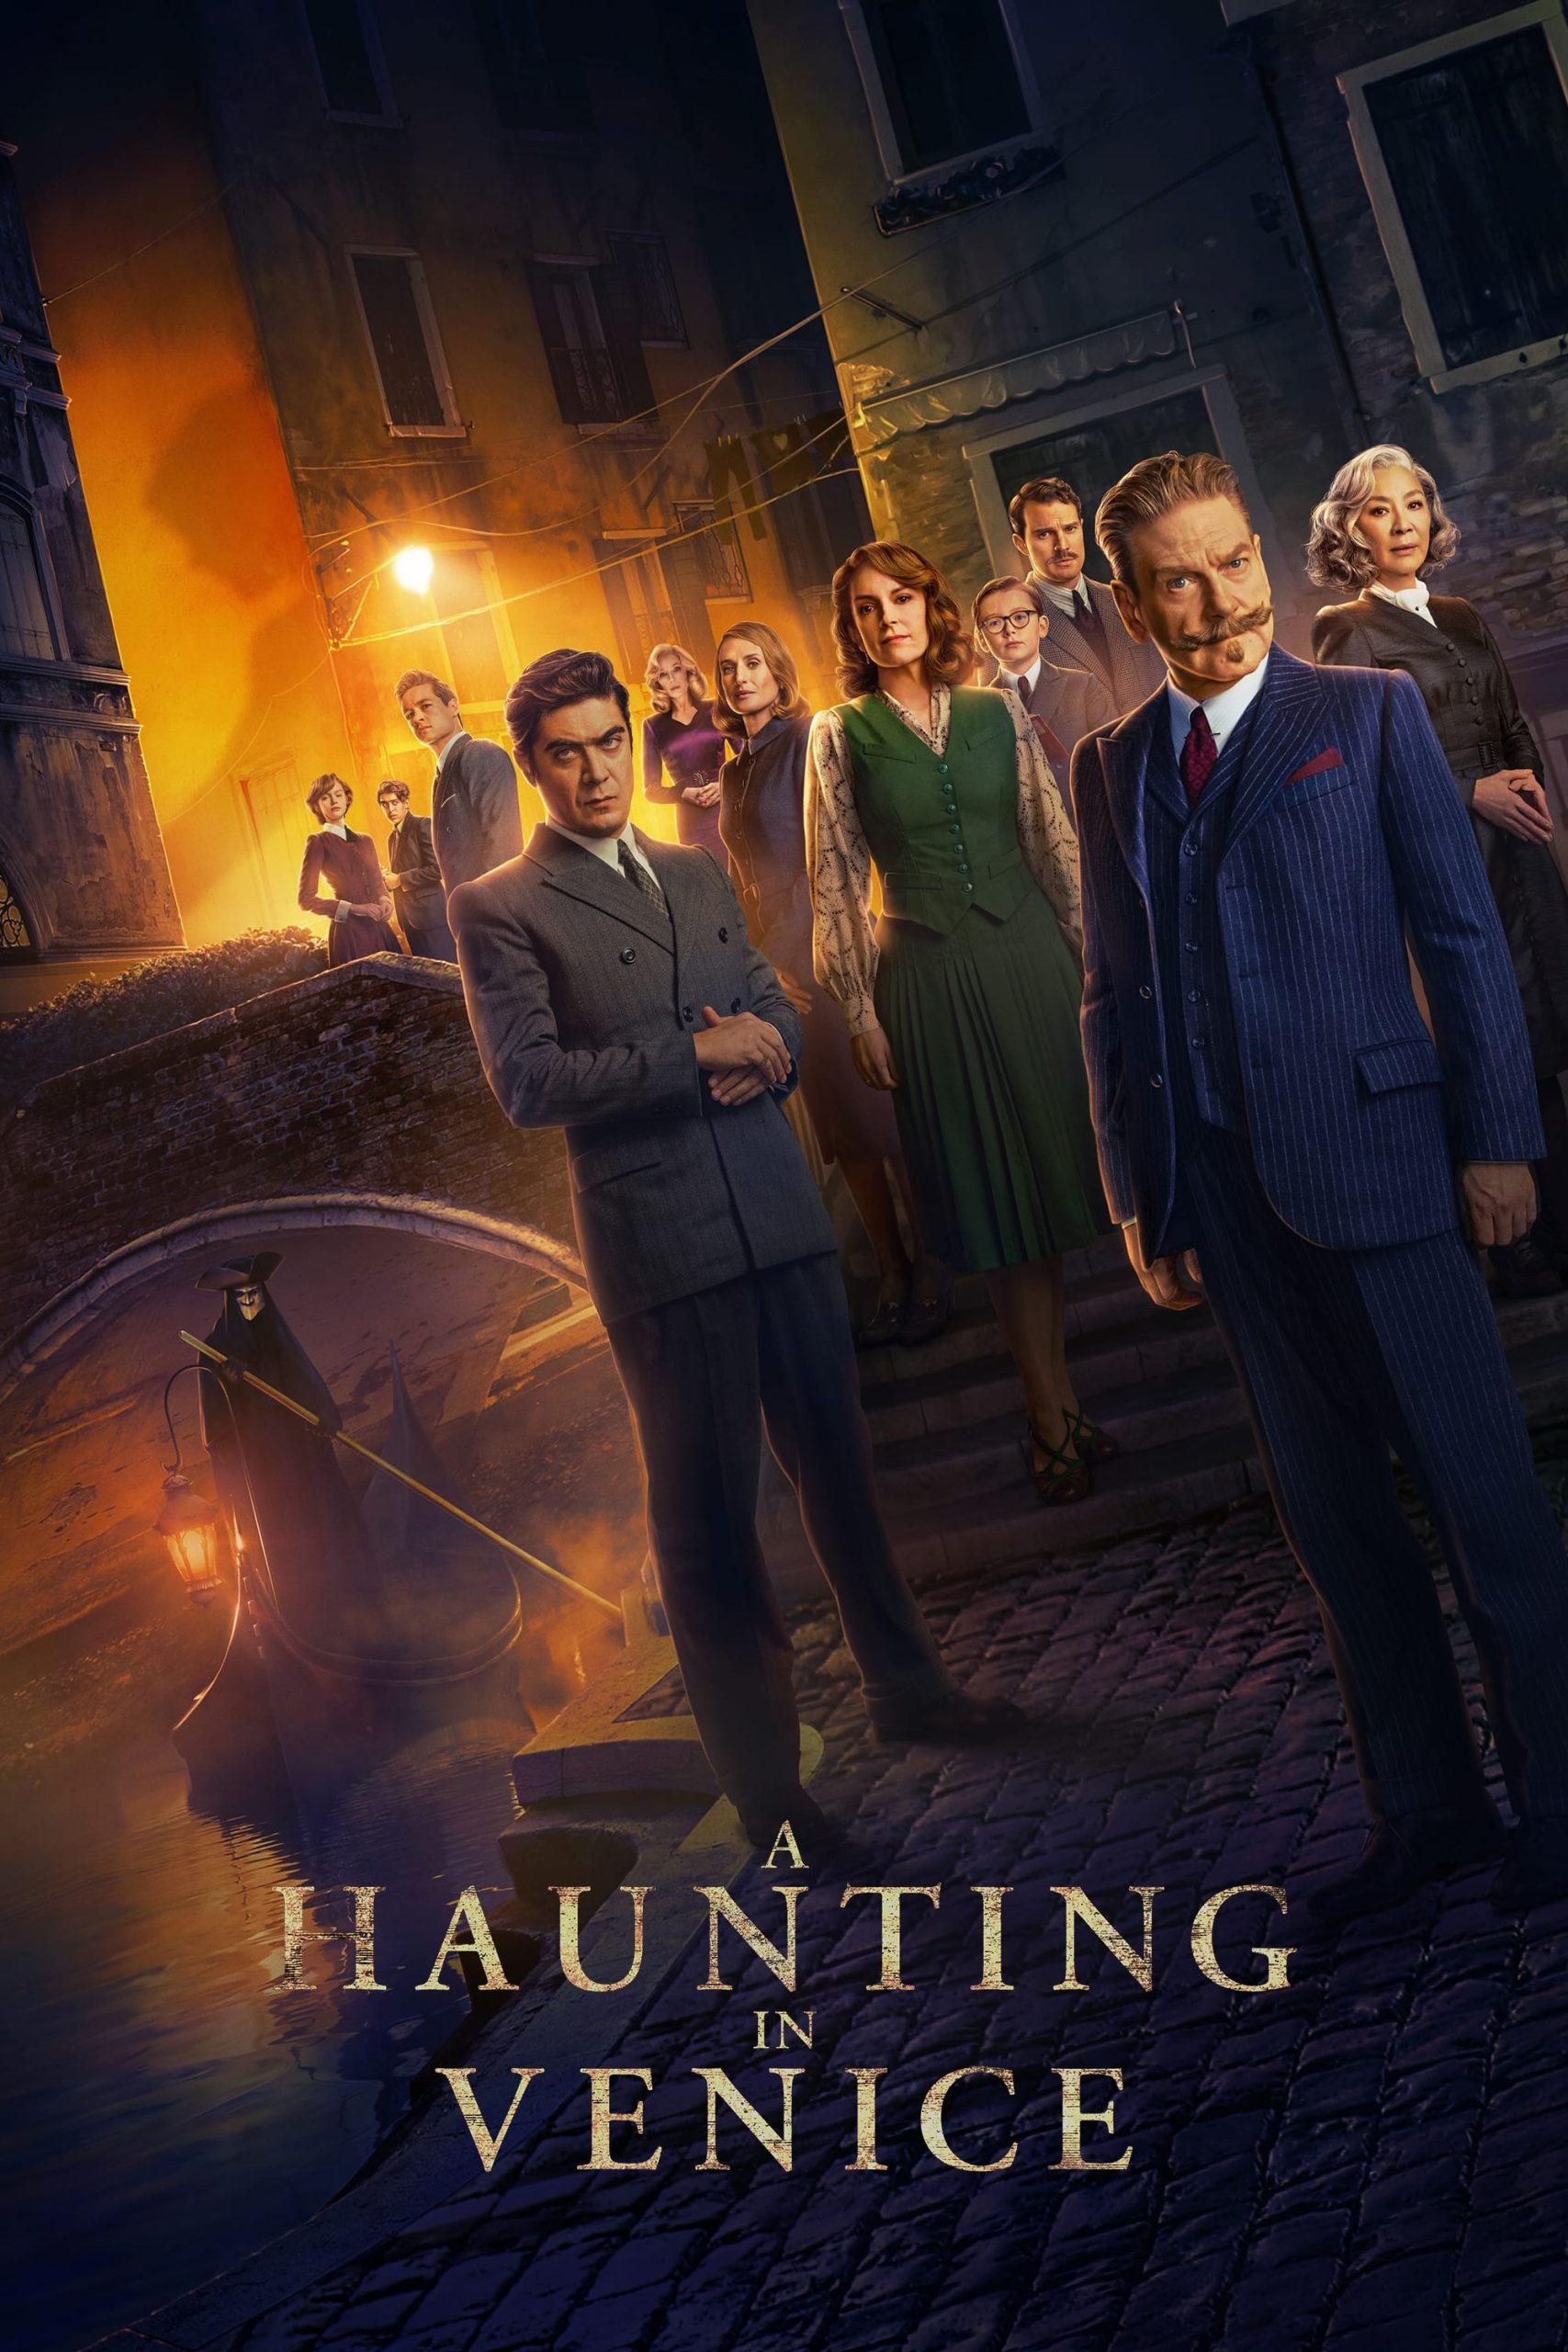 Poster for the movie "A Haunting in Venice"